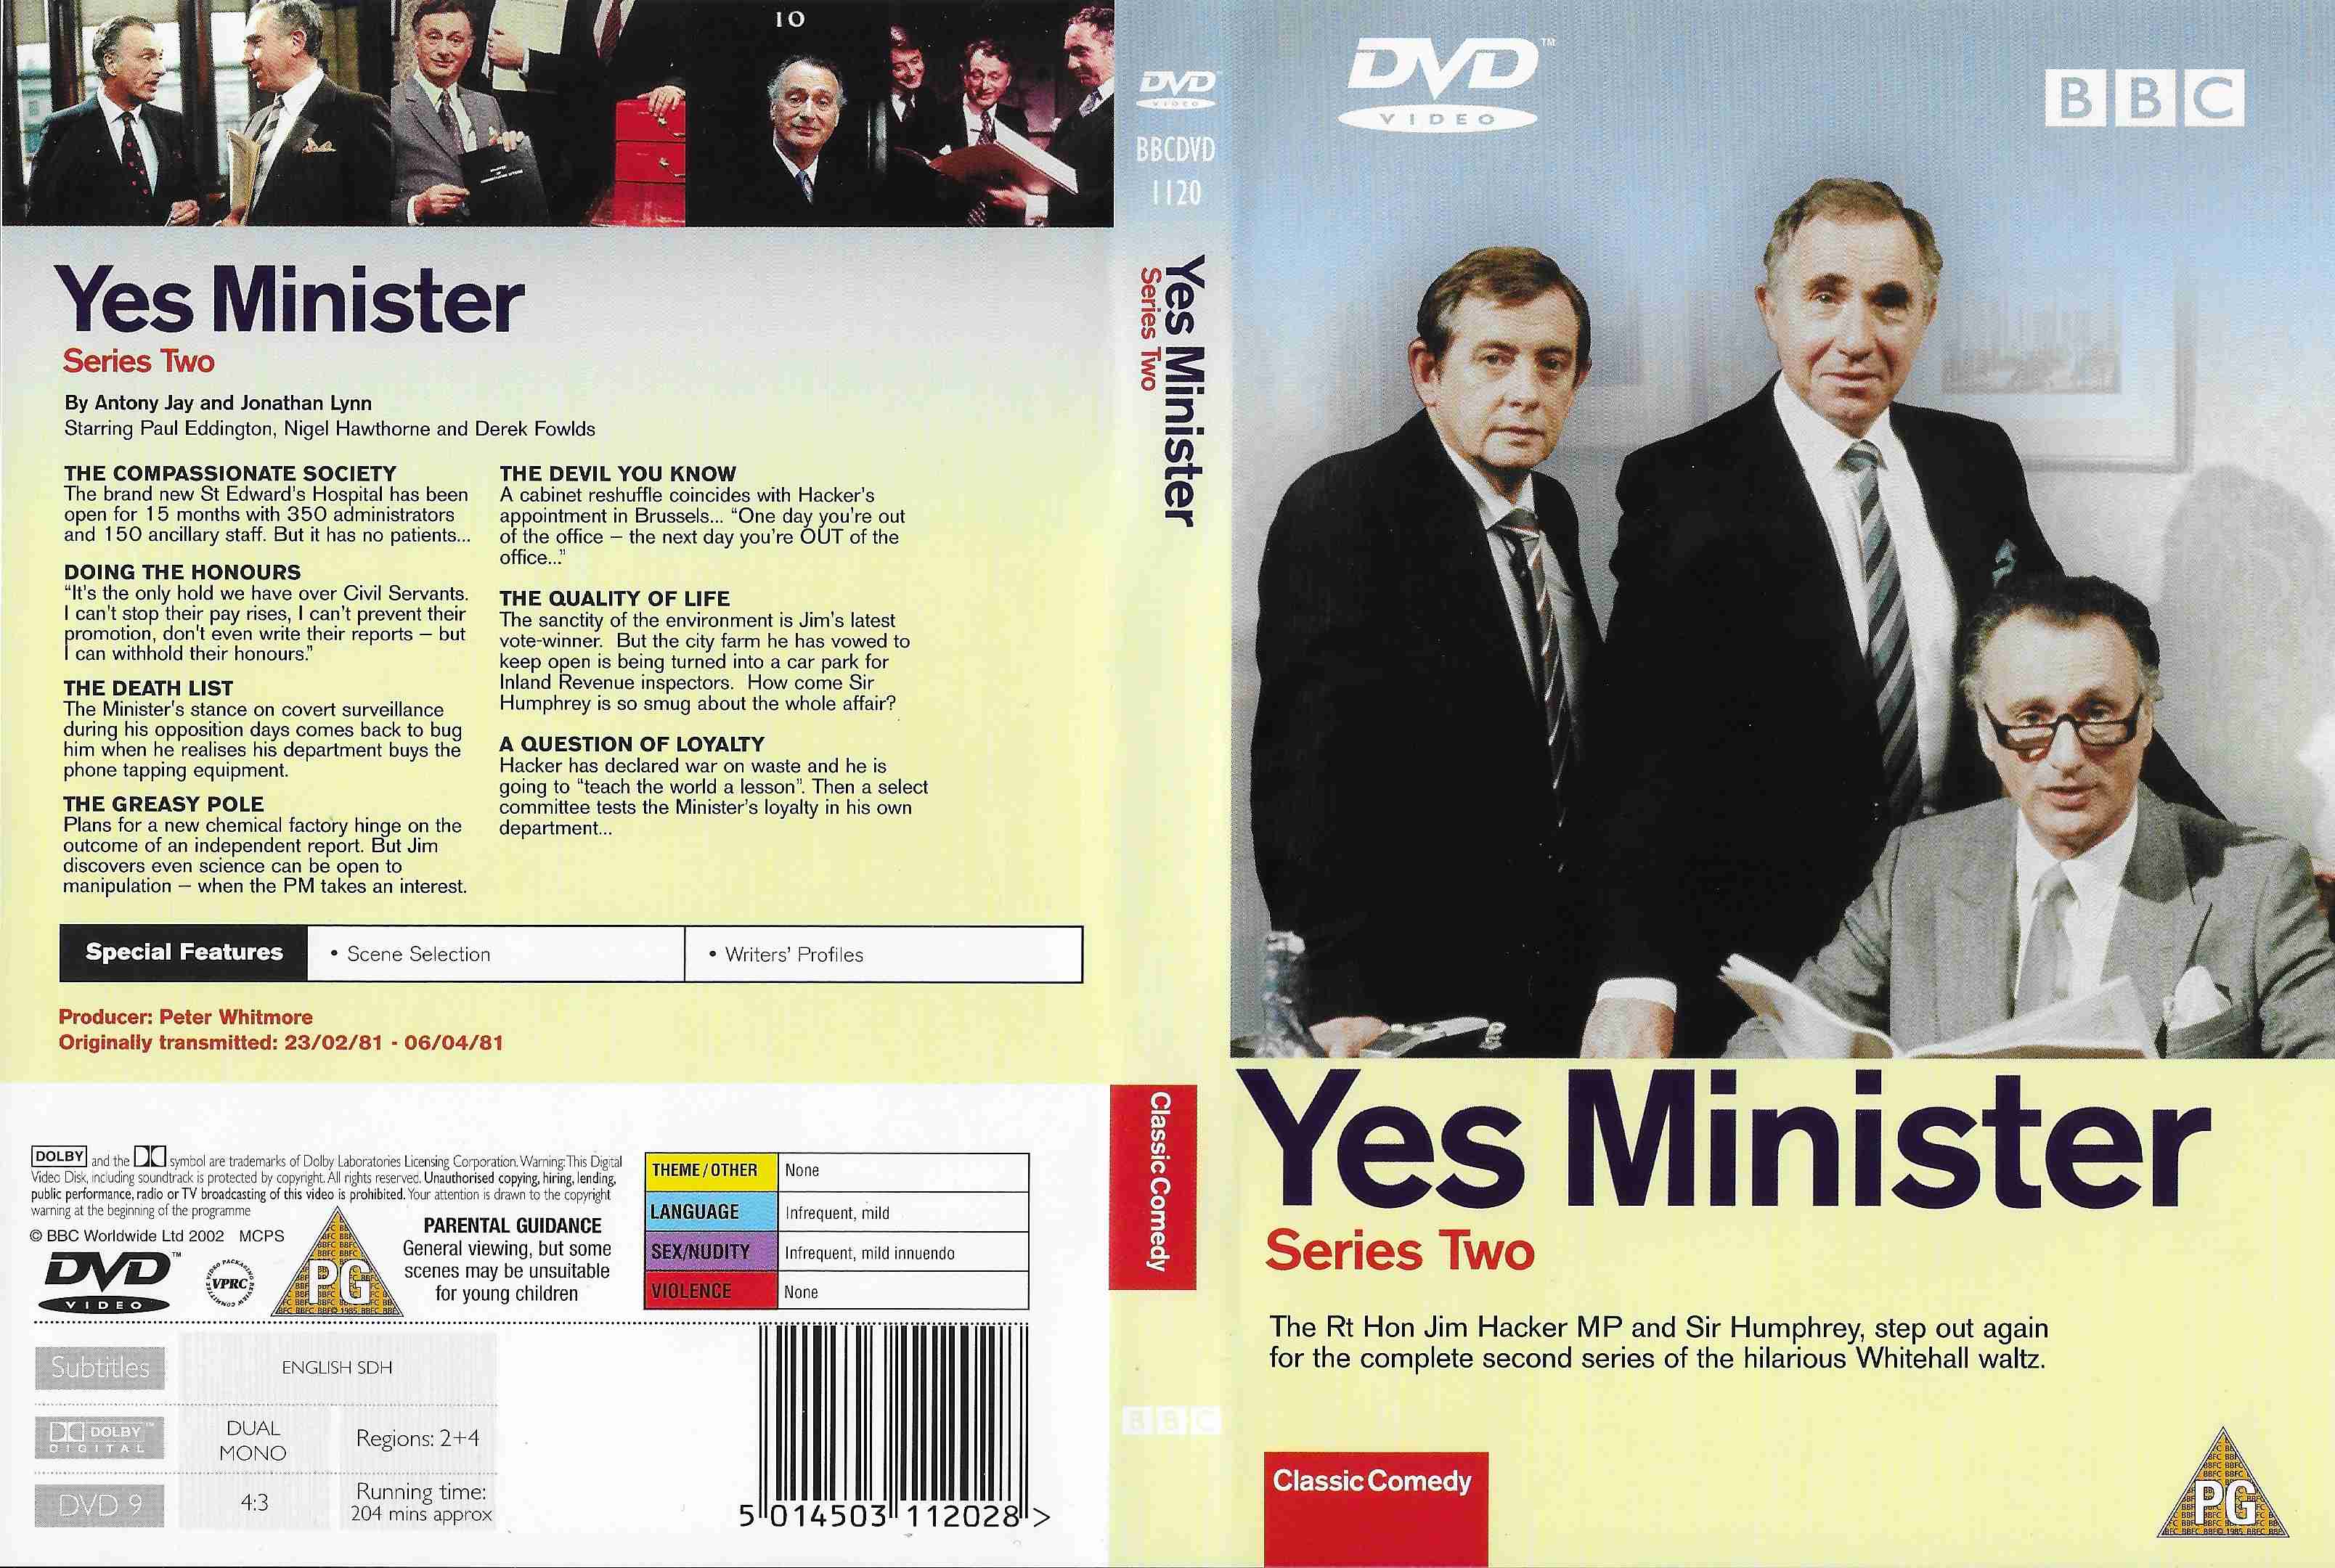 Picture of BBCDVD 1120 Yes Minister - Series Two by artist Antony Jay / Jonathan Lynn from the BBC records and Tapes library